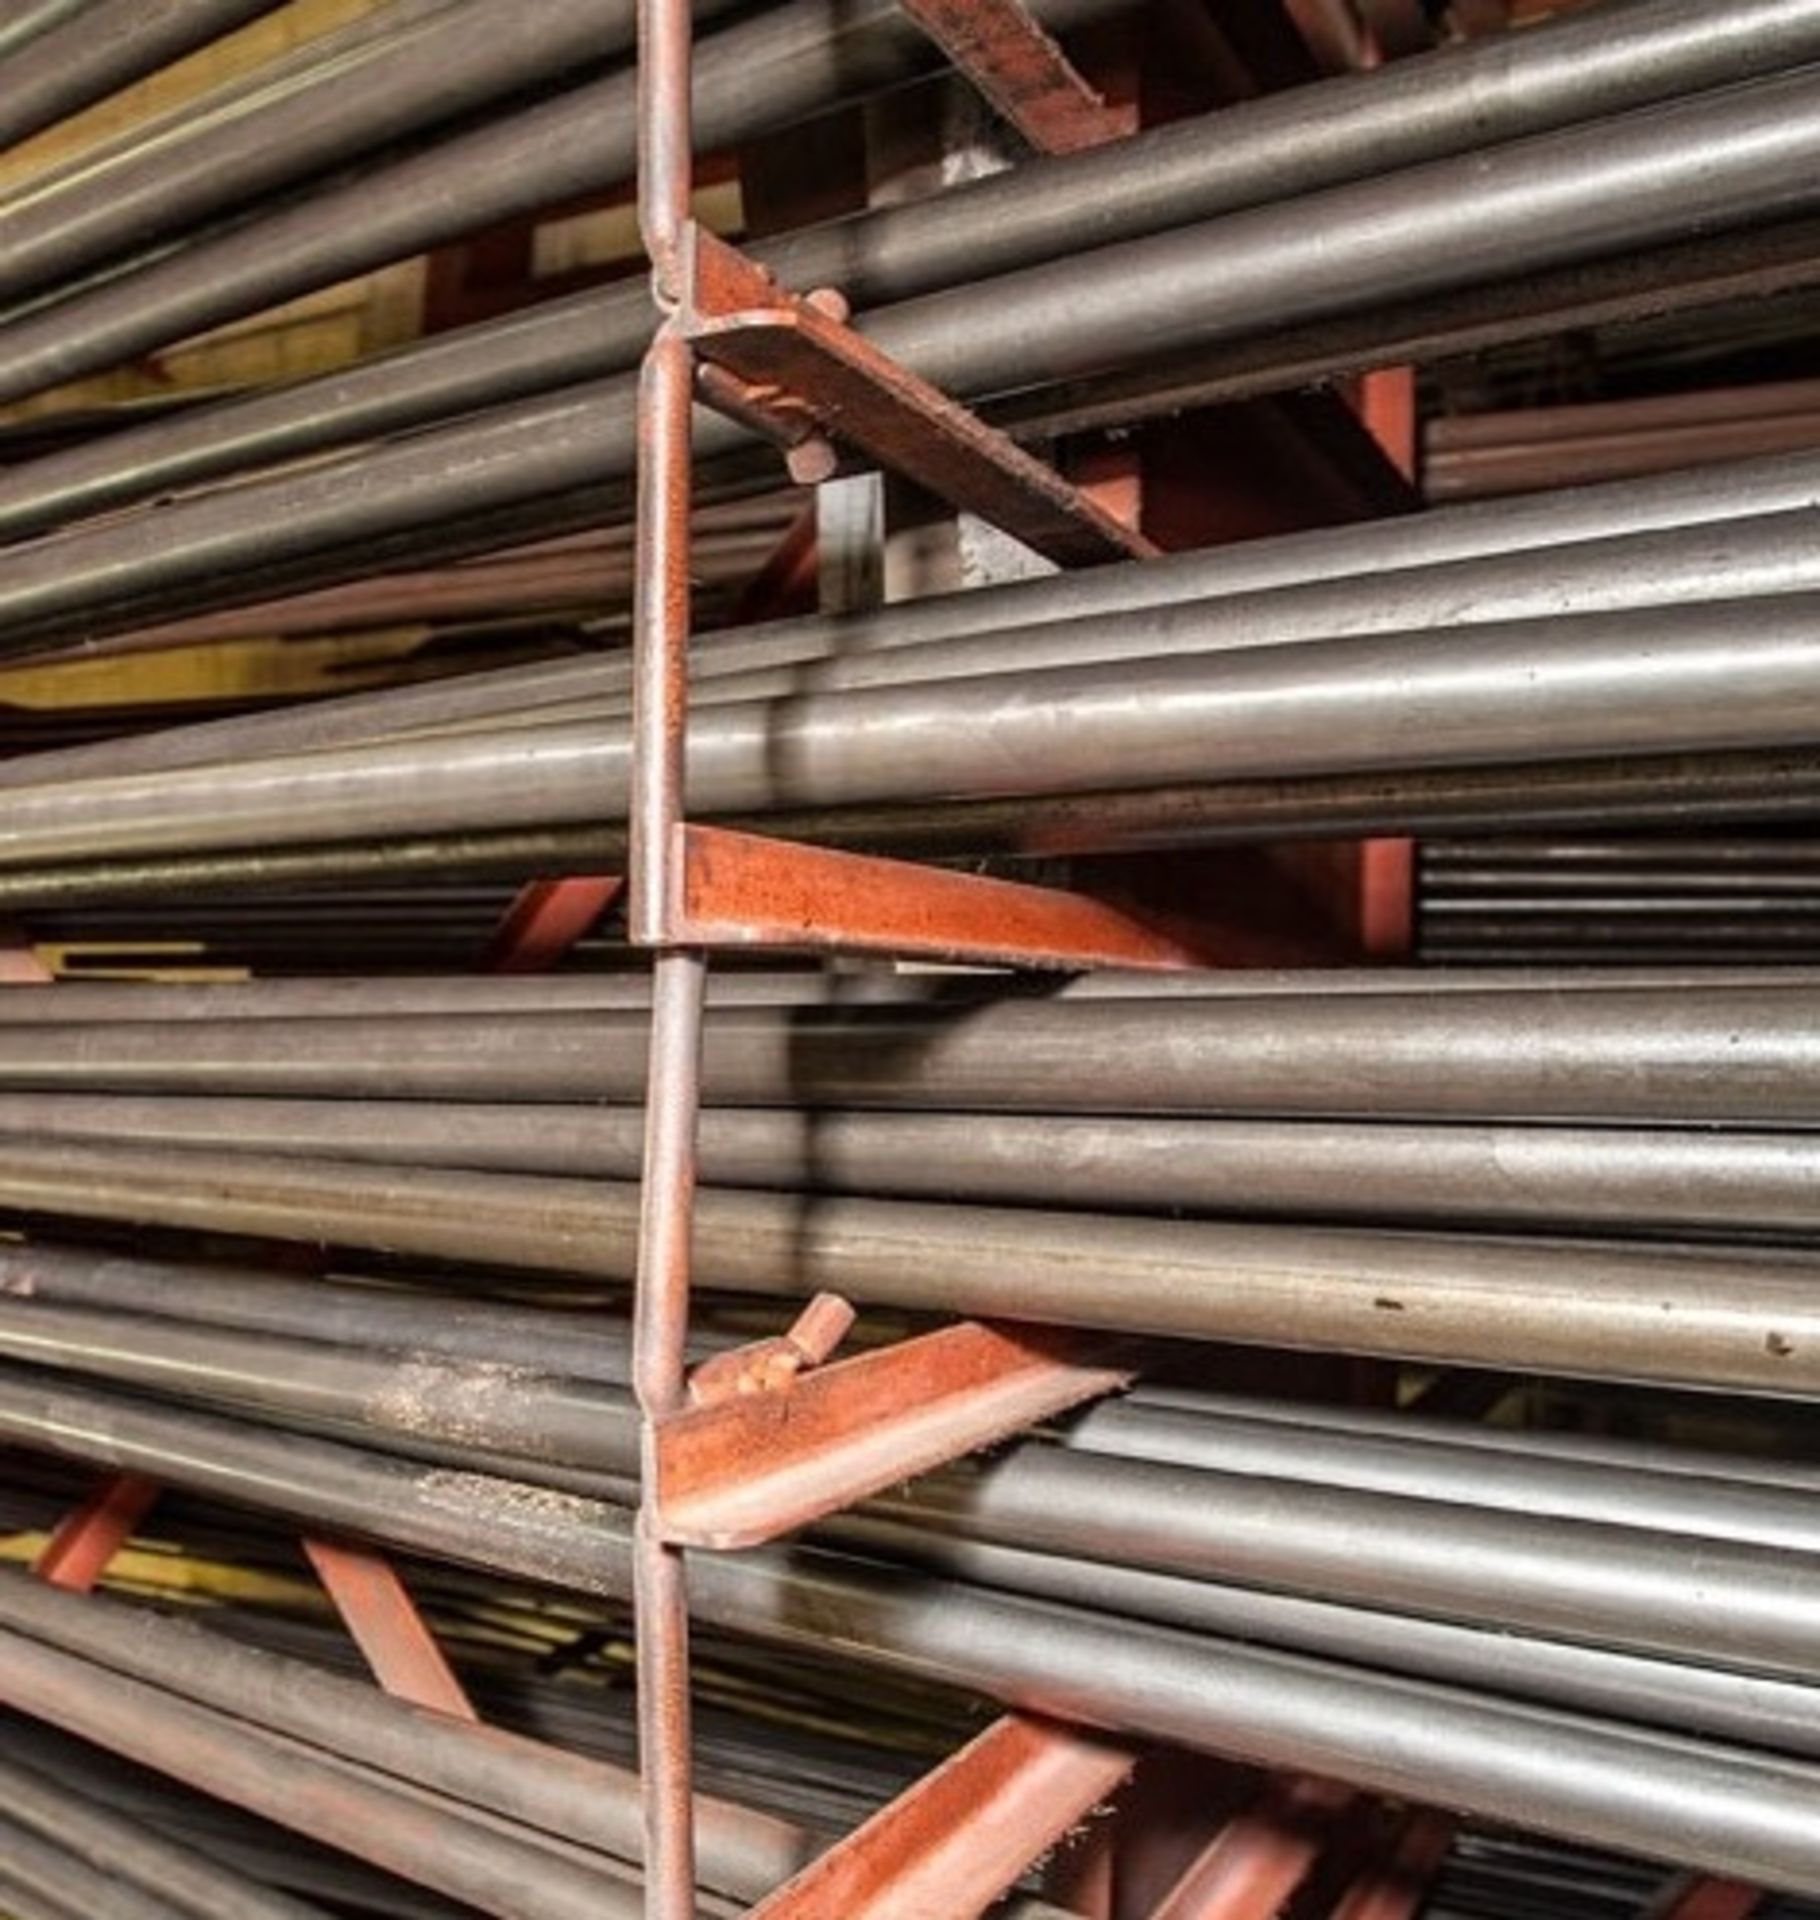 Lot - STEEL Pipe - 1.9" diameter - 20' long - 80 units in lot - 2000lbs estimated (shipping quote